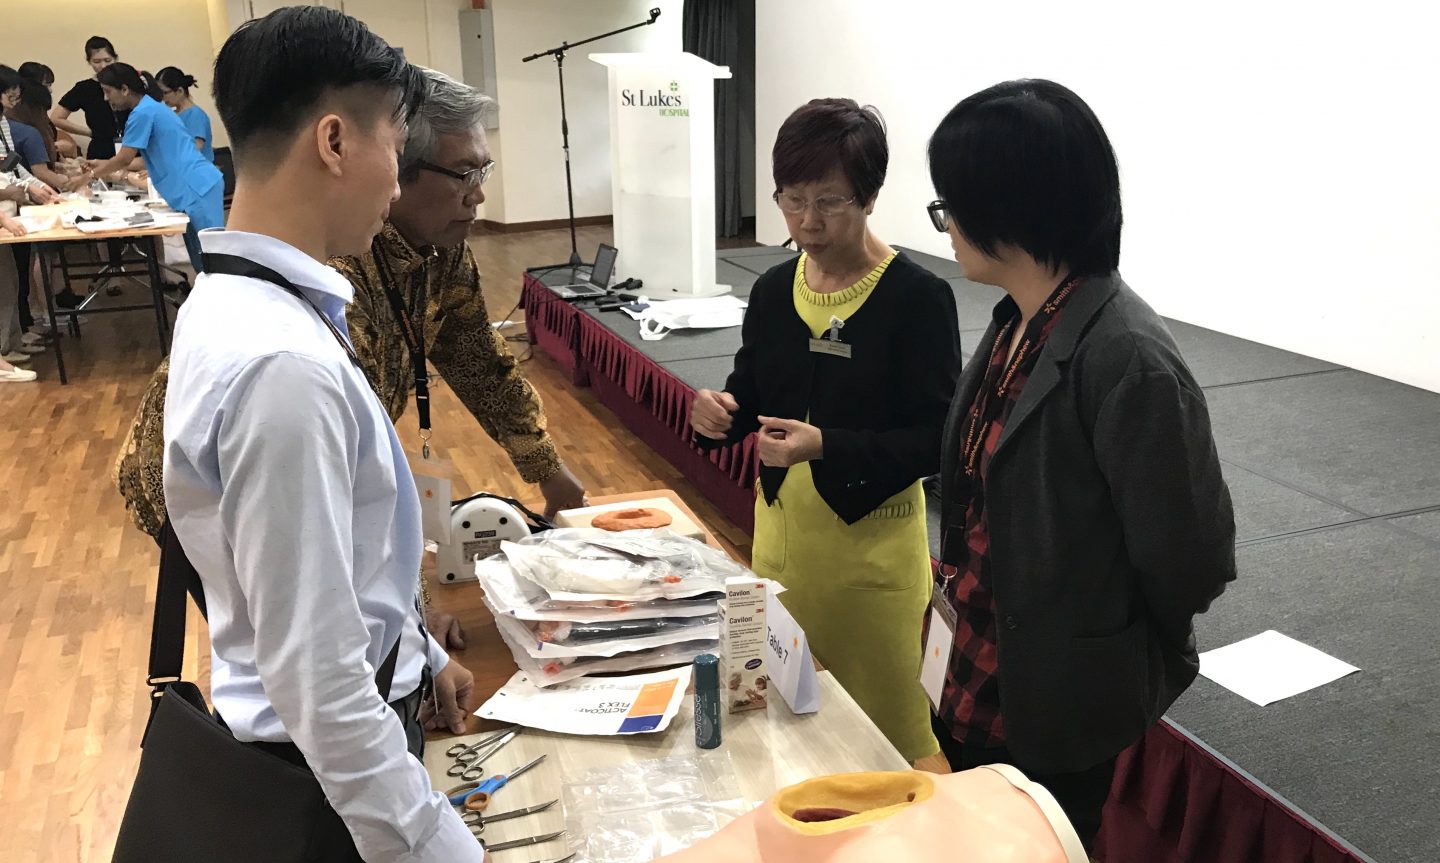 Susie Goh (second from right) trains other healthcare professionals on how to treat wounds effectively at the Negative Pressure Wound Therapy course. St Luke's